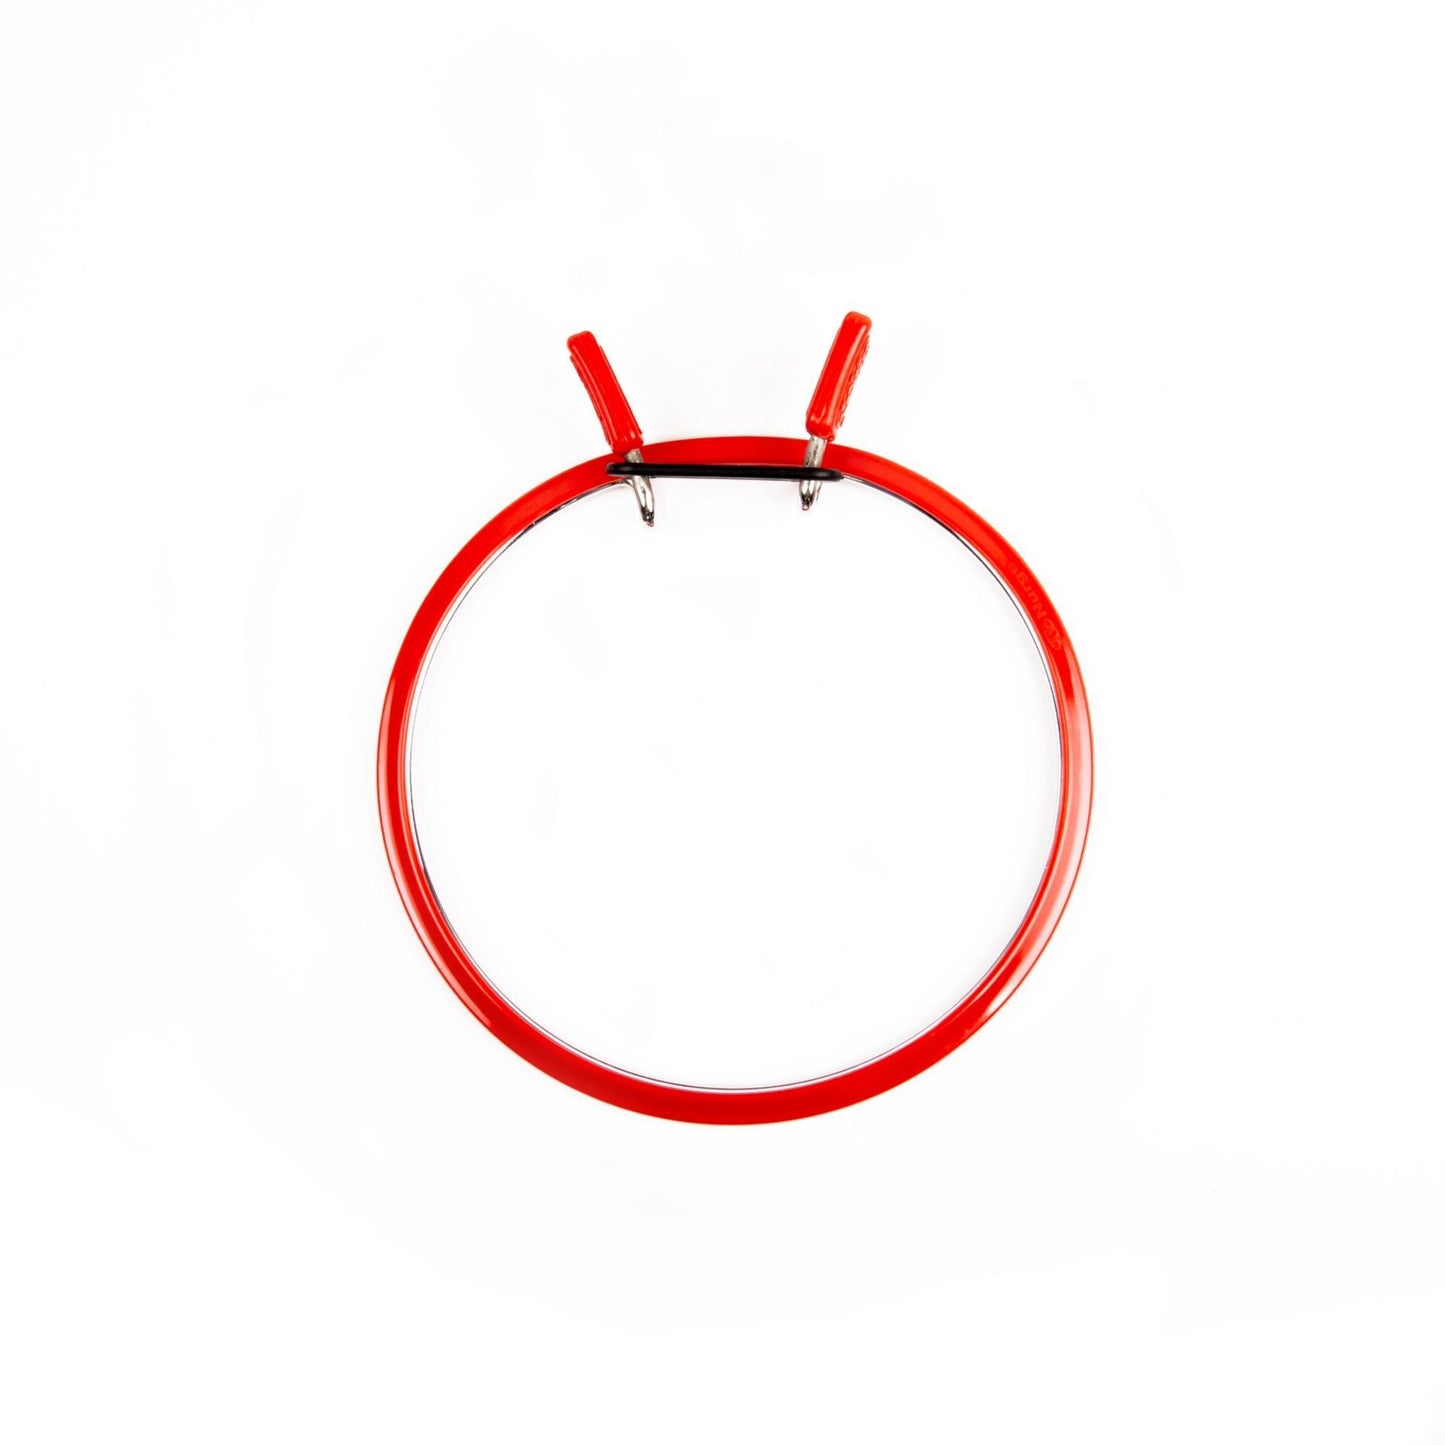 Nurge Spring Tension Hoop for Embroidery or Sewing - Leo Hobby